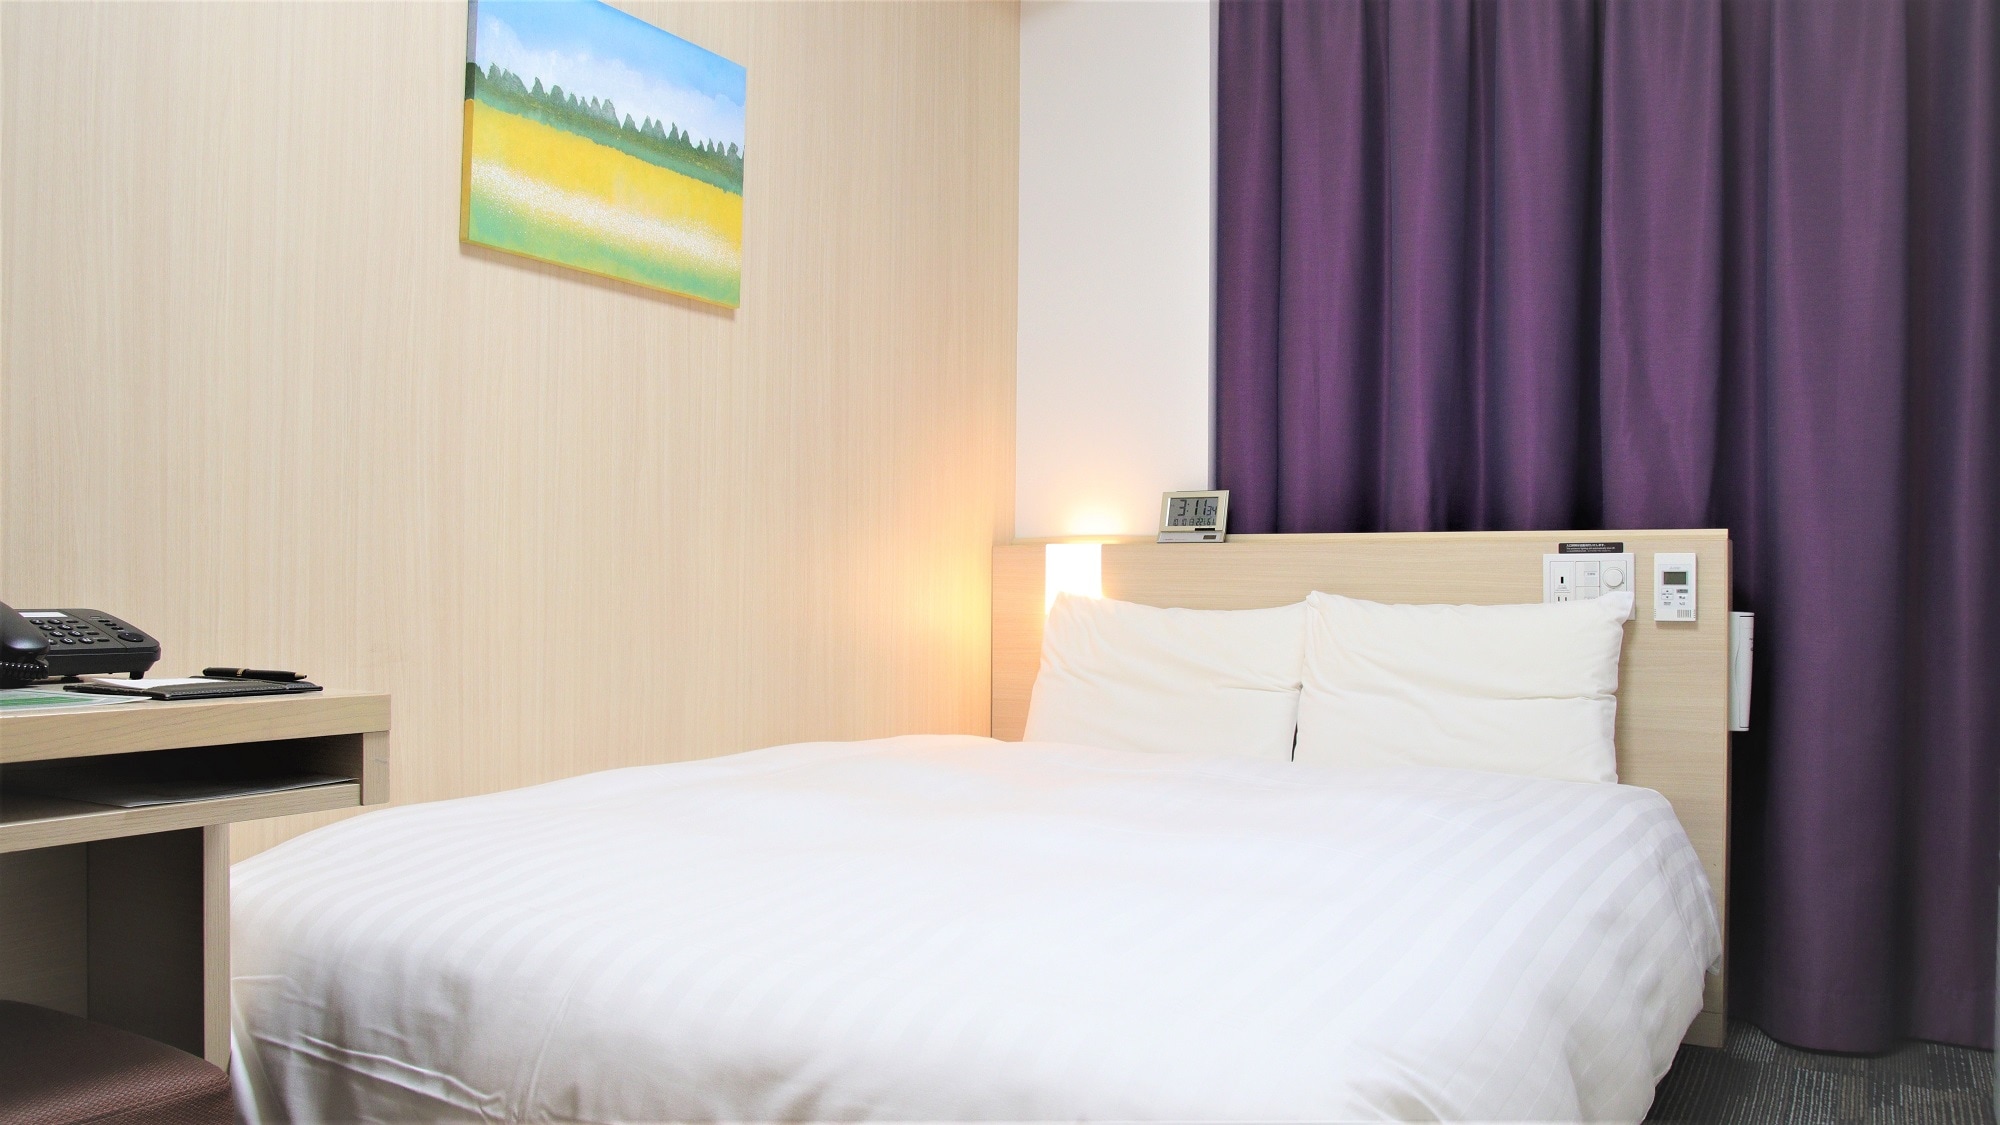 ◆ Double room 13.2 to 14.3㎡ 1 bed made by Serta